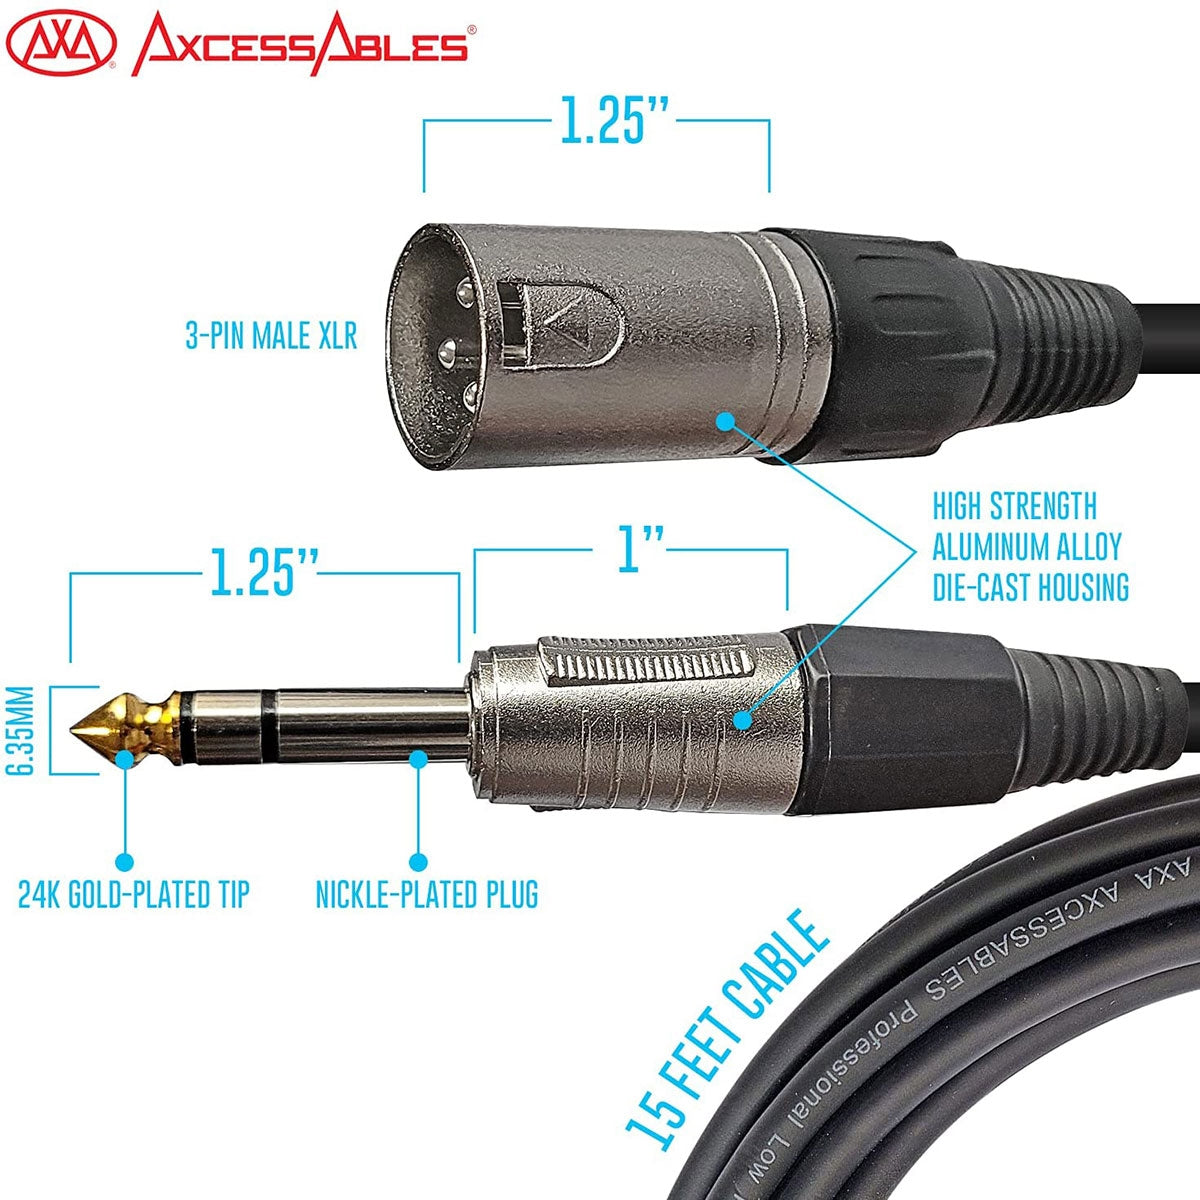 STC-JX5 | 1/4 to XLR Speaker Cable, 5 Feet, Male to Male